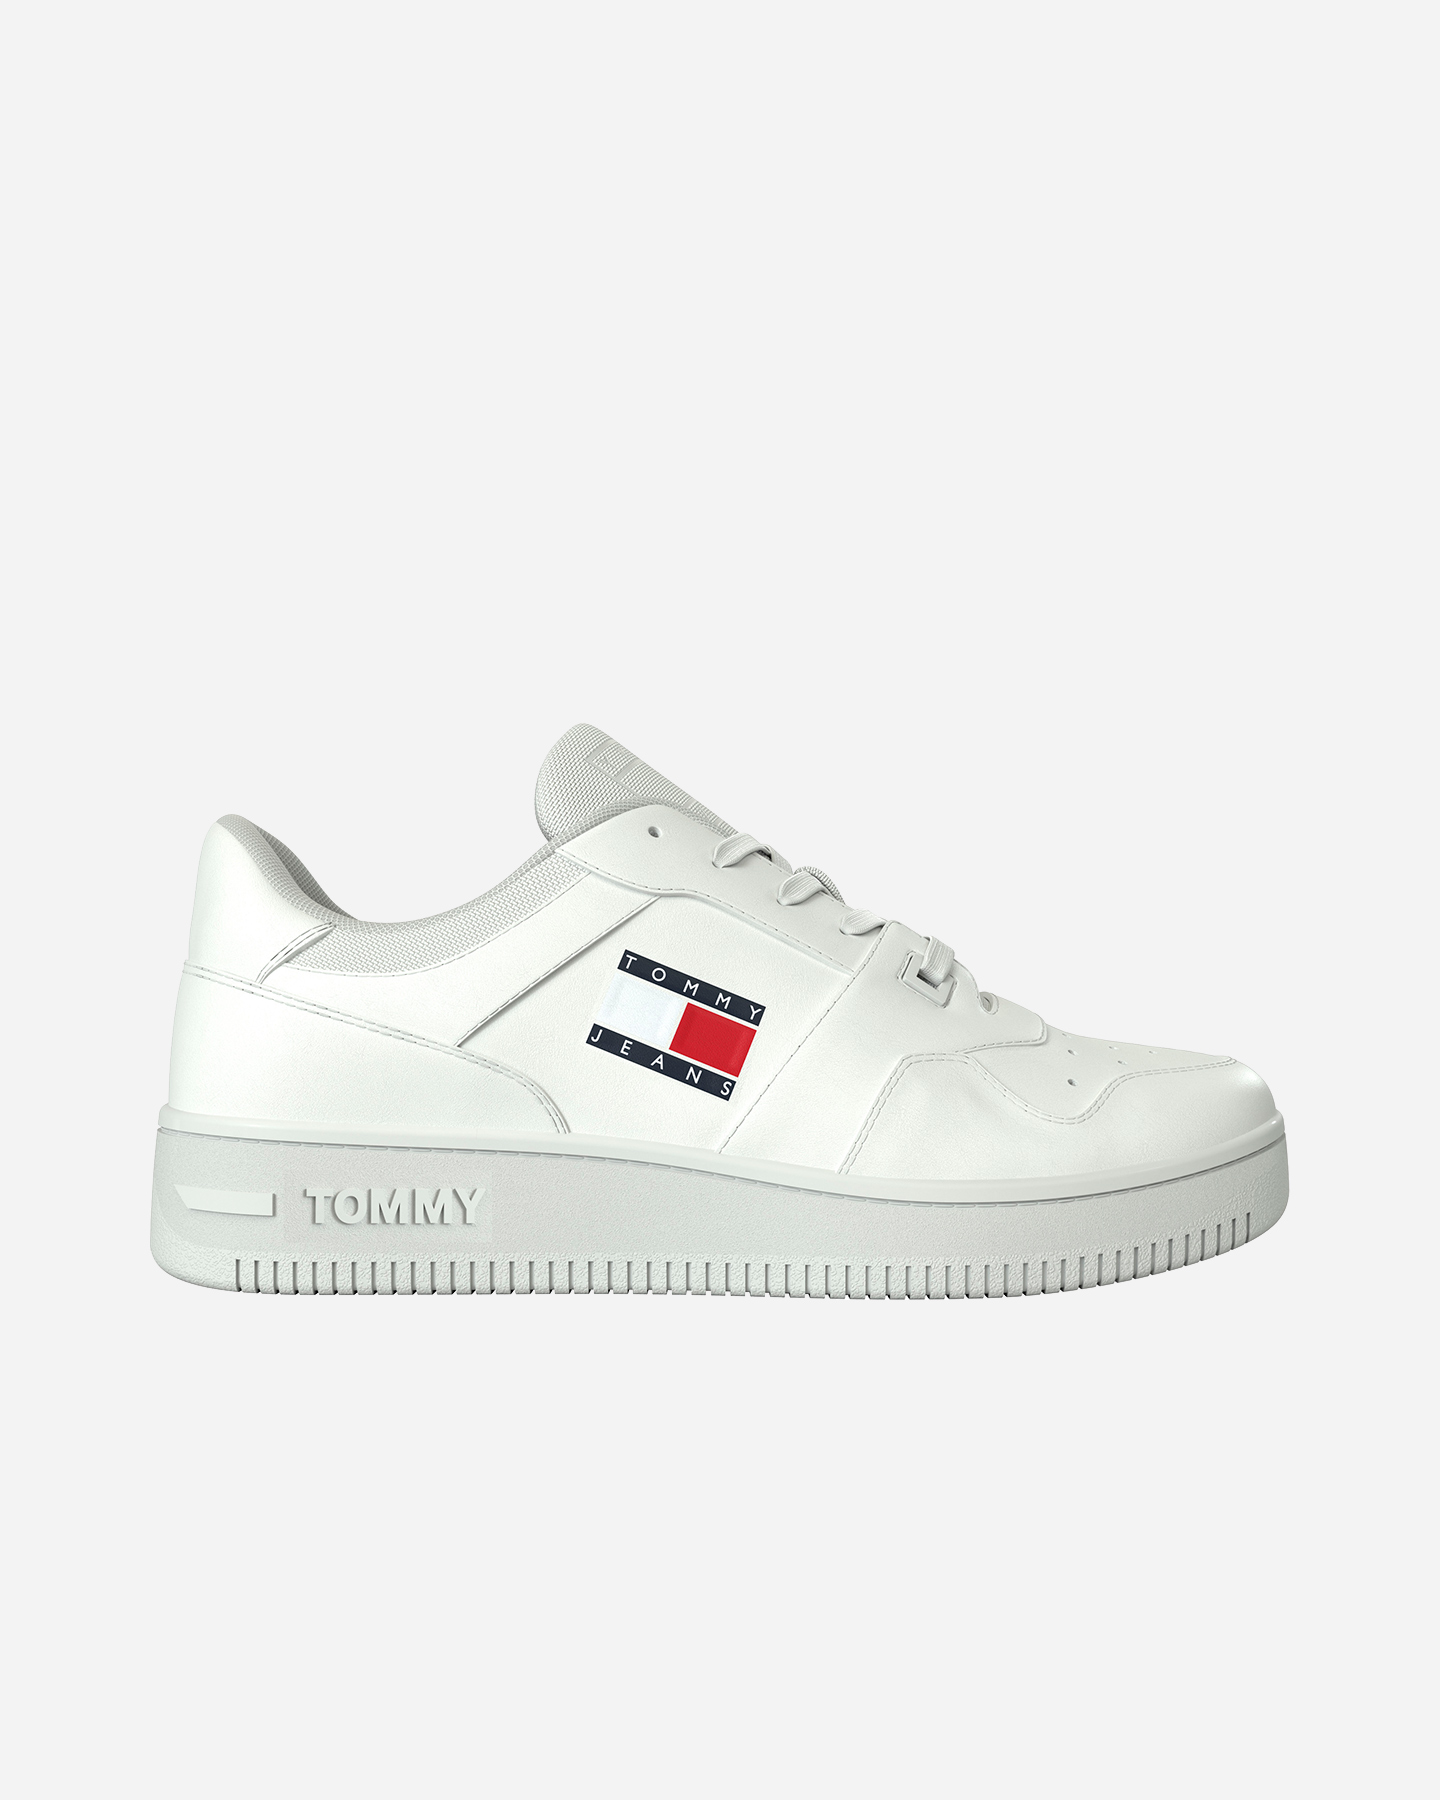 Image of Tommy Hilfiger Retro Basket Leather W - Scarpe Sneakers - Donna